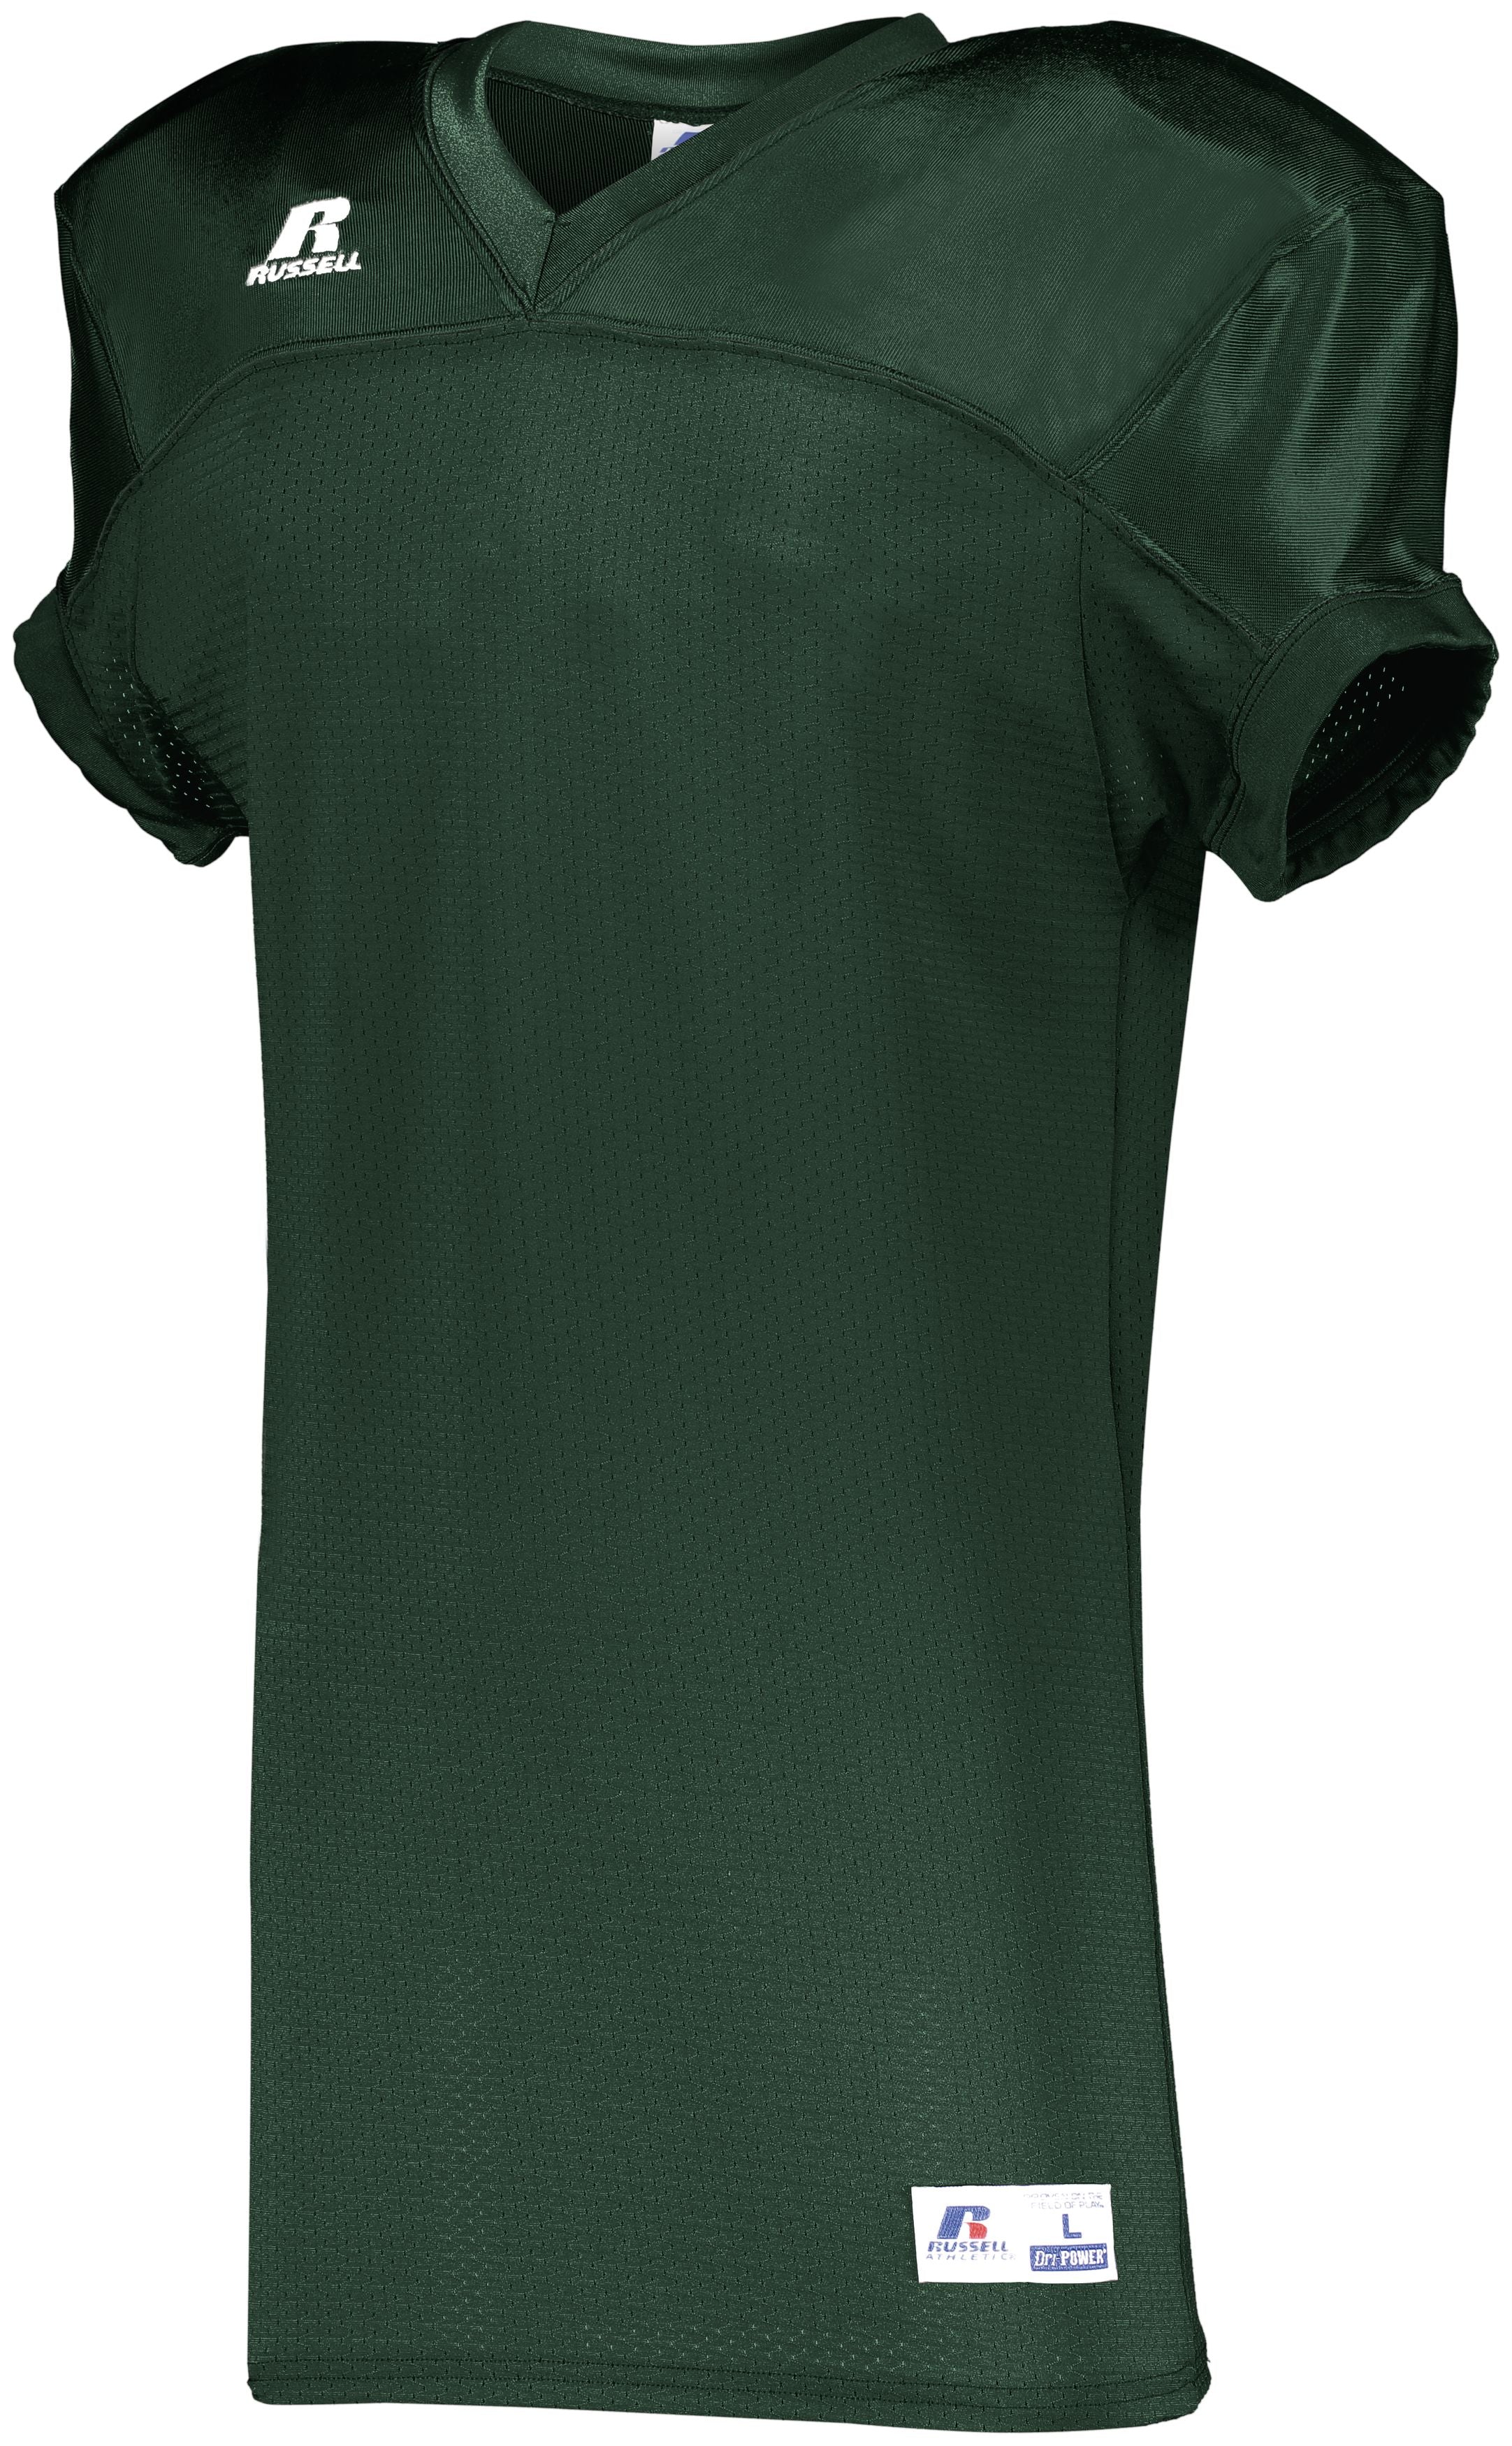 Russell Athletic Stretch Mesh Game Jersey in Dark Green  -Part of the Adult, Adult-Jersey, Football, Russell-Athletic-Products, Shirts, All-Sports, All-Sports-1 product lines at KanaleyCreations.com